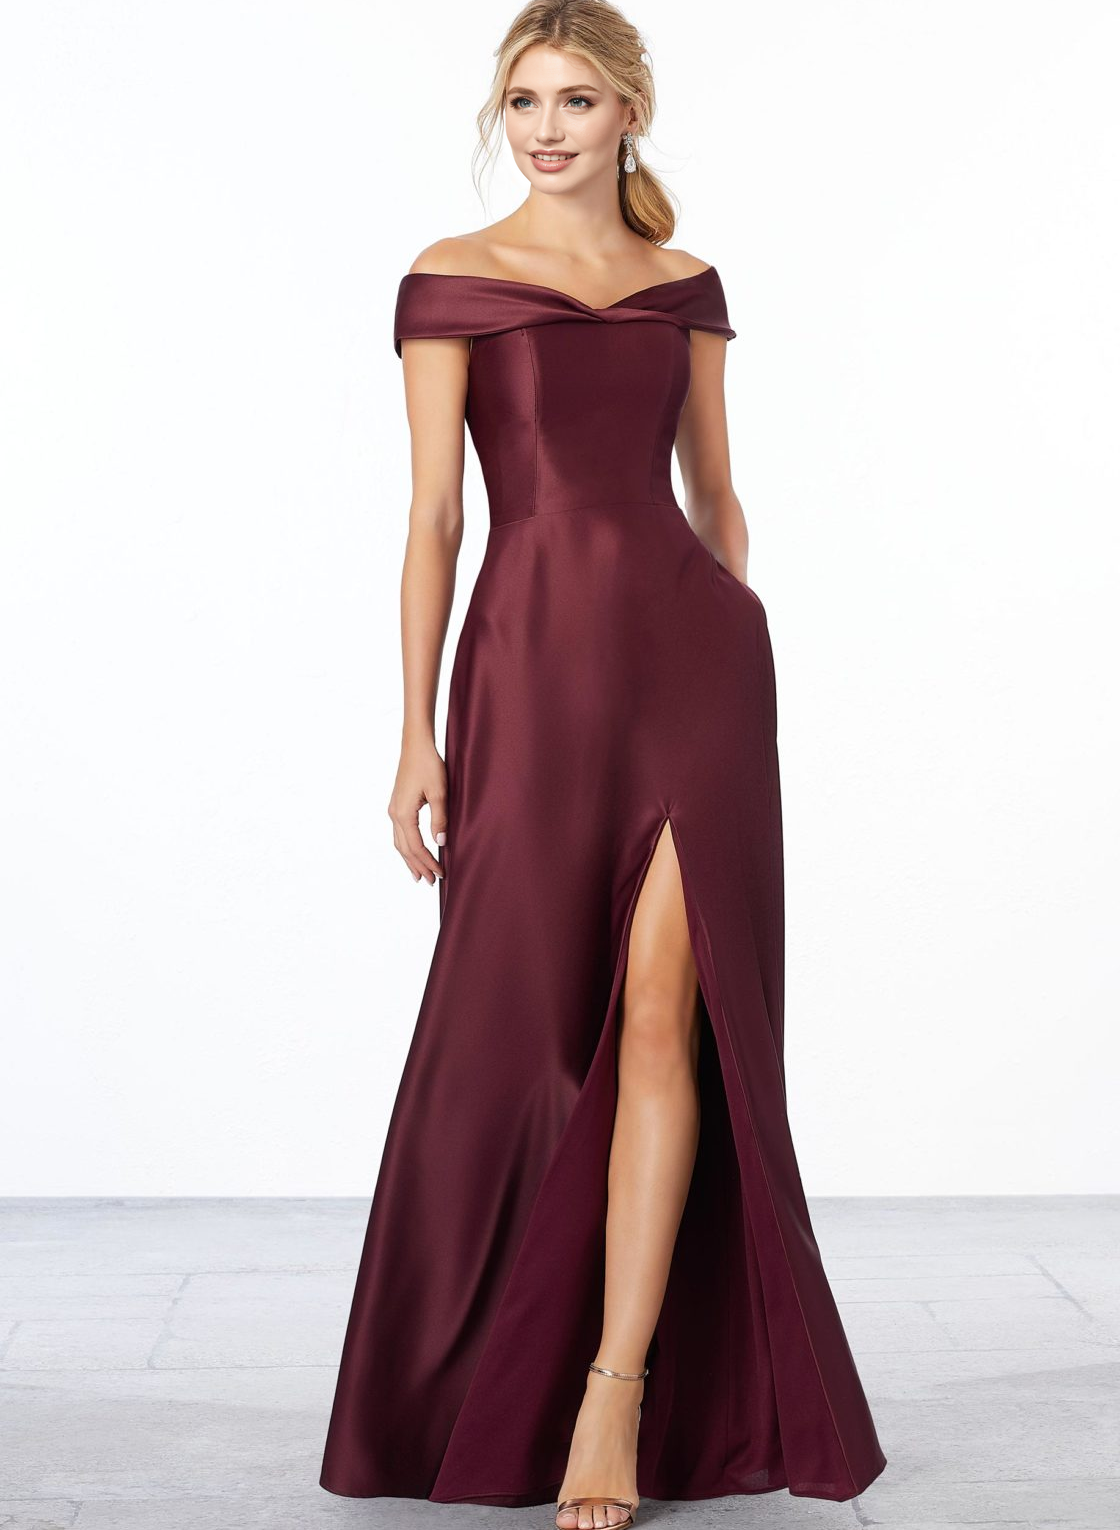 Red Satin Off-The-Shoulder A-Line Bridesmaid Dresses With Pockets